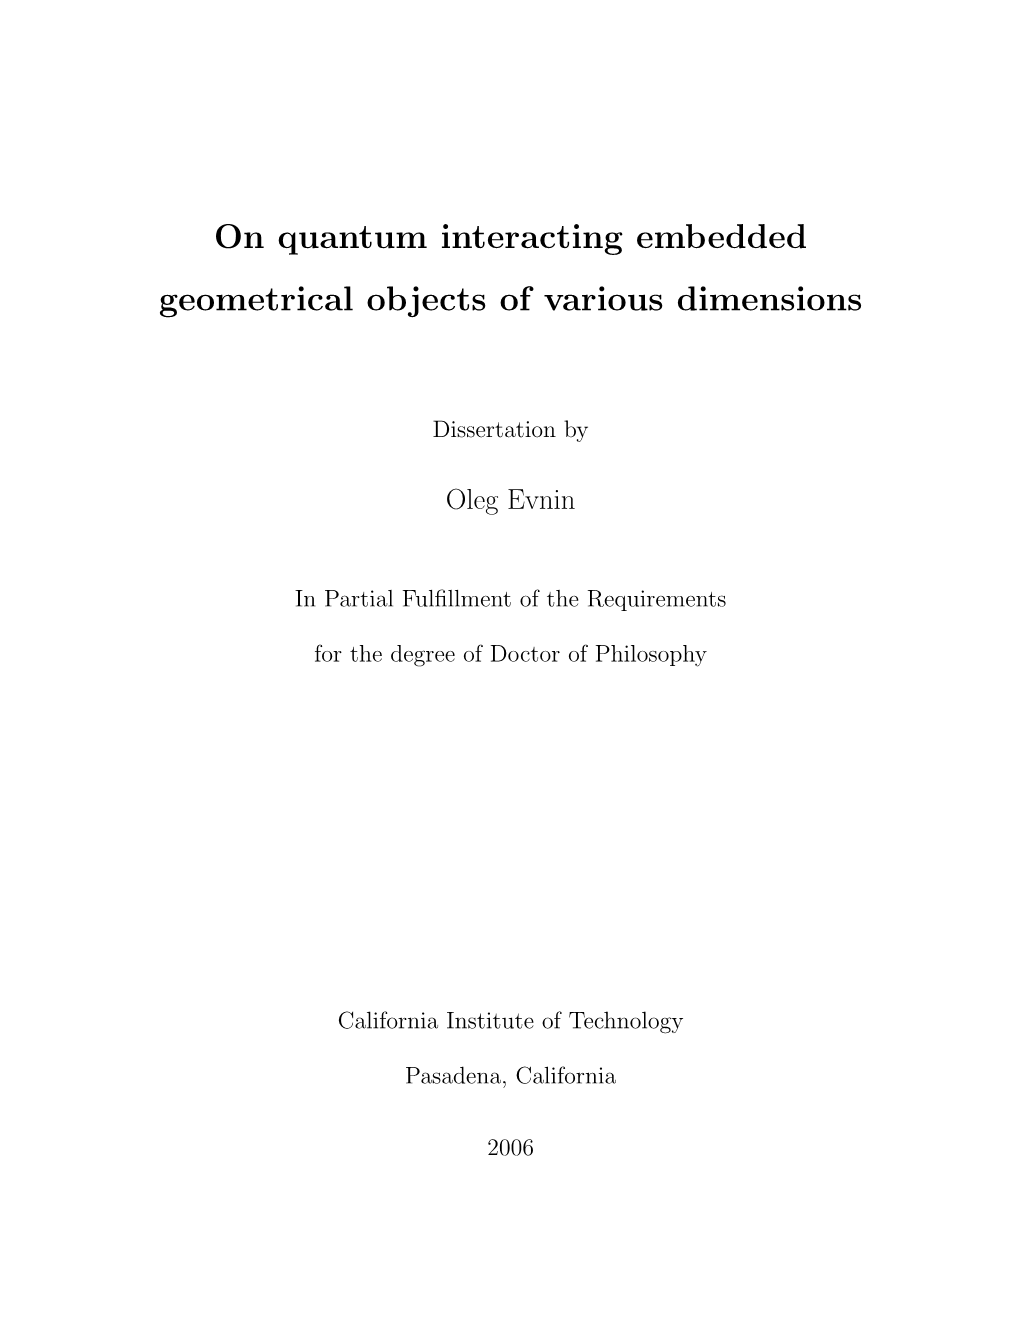 On Quantum Interacting Embedded Geometrical Objects of Various Dimensions